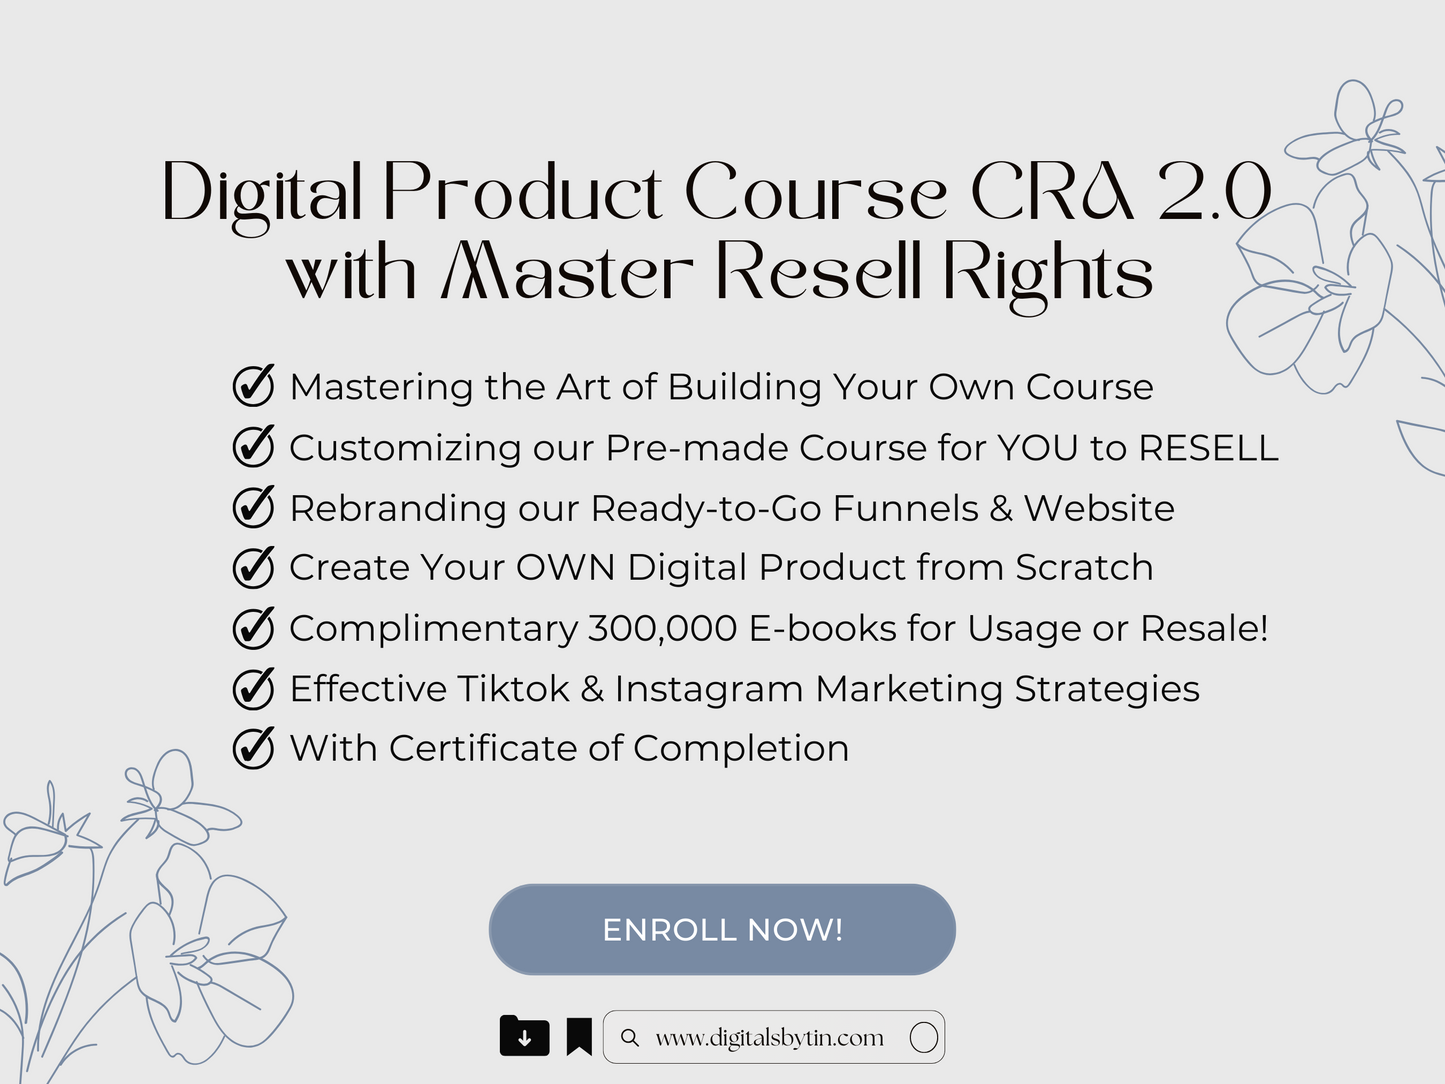 BASIC BUNDLE - Digital Product Creation Course with Master Resell Rights | digitalsbytin